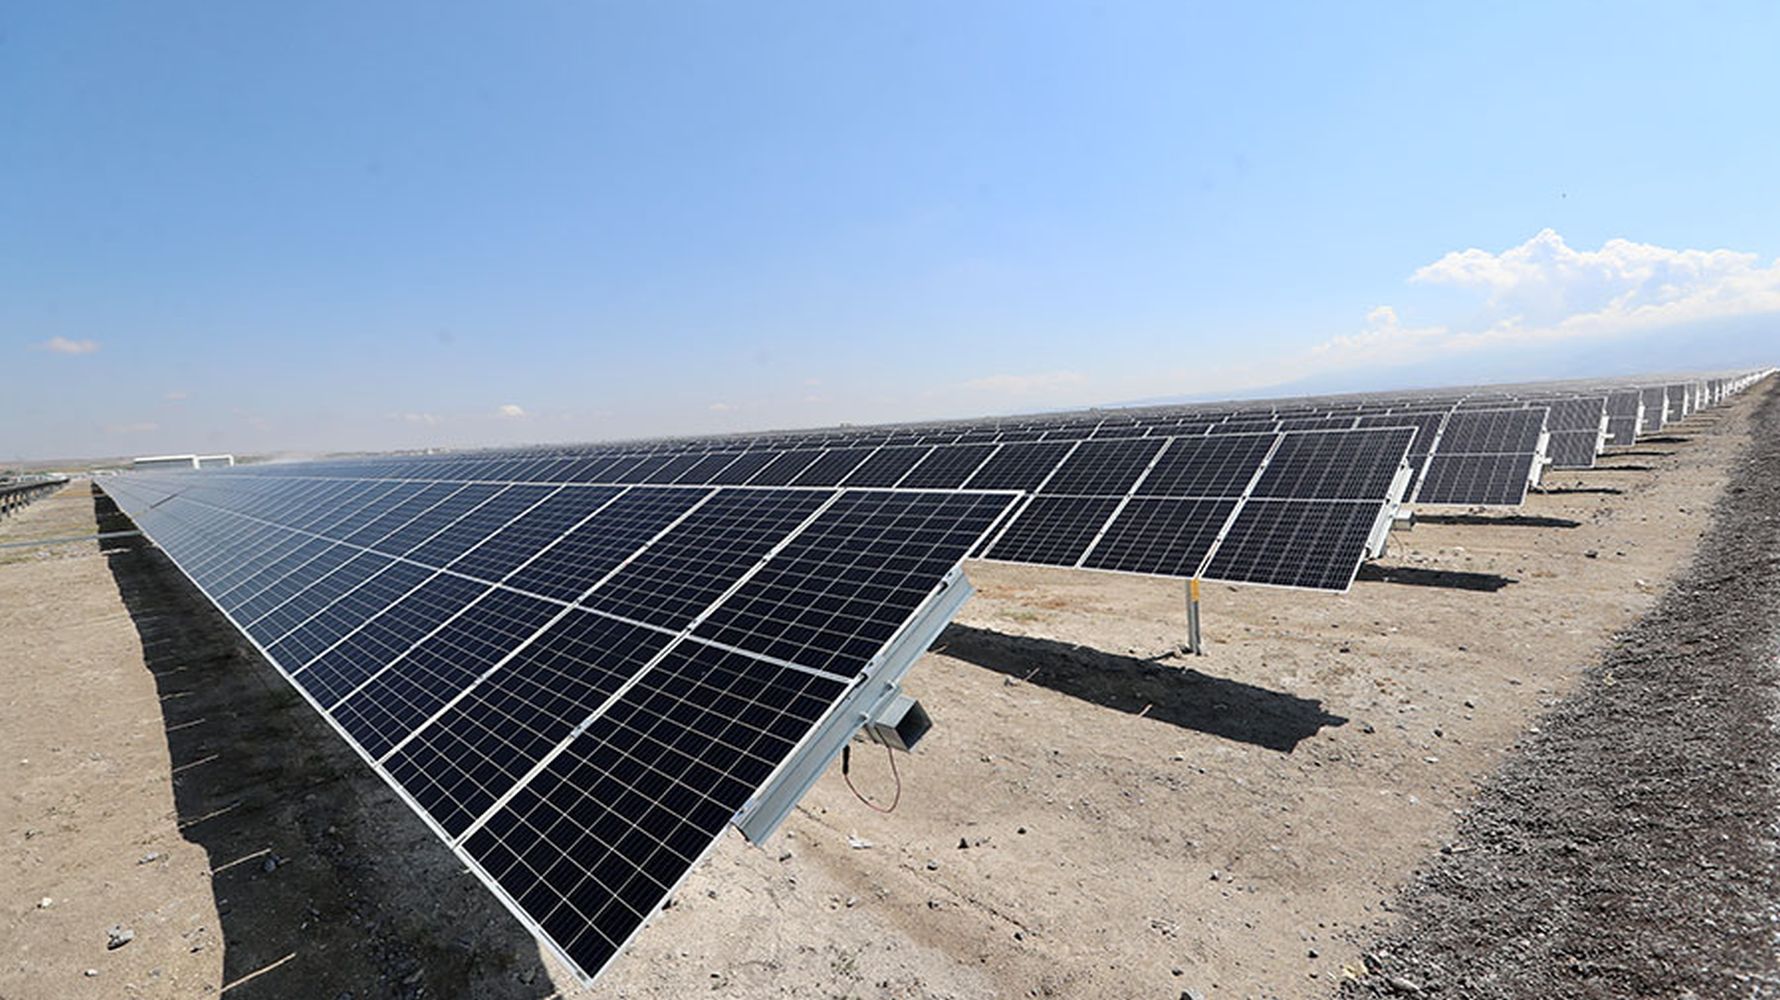 Turkey’s largest solar power plant is set to go into operation at full capacity in 2022 - raillynews